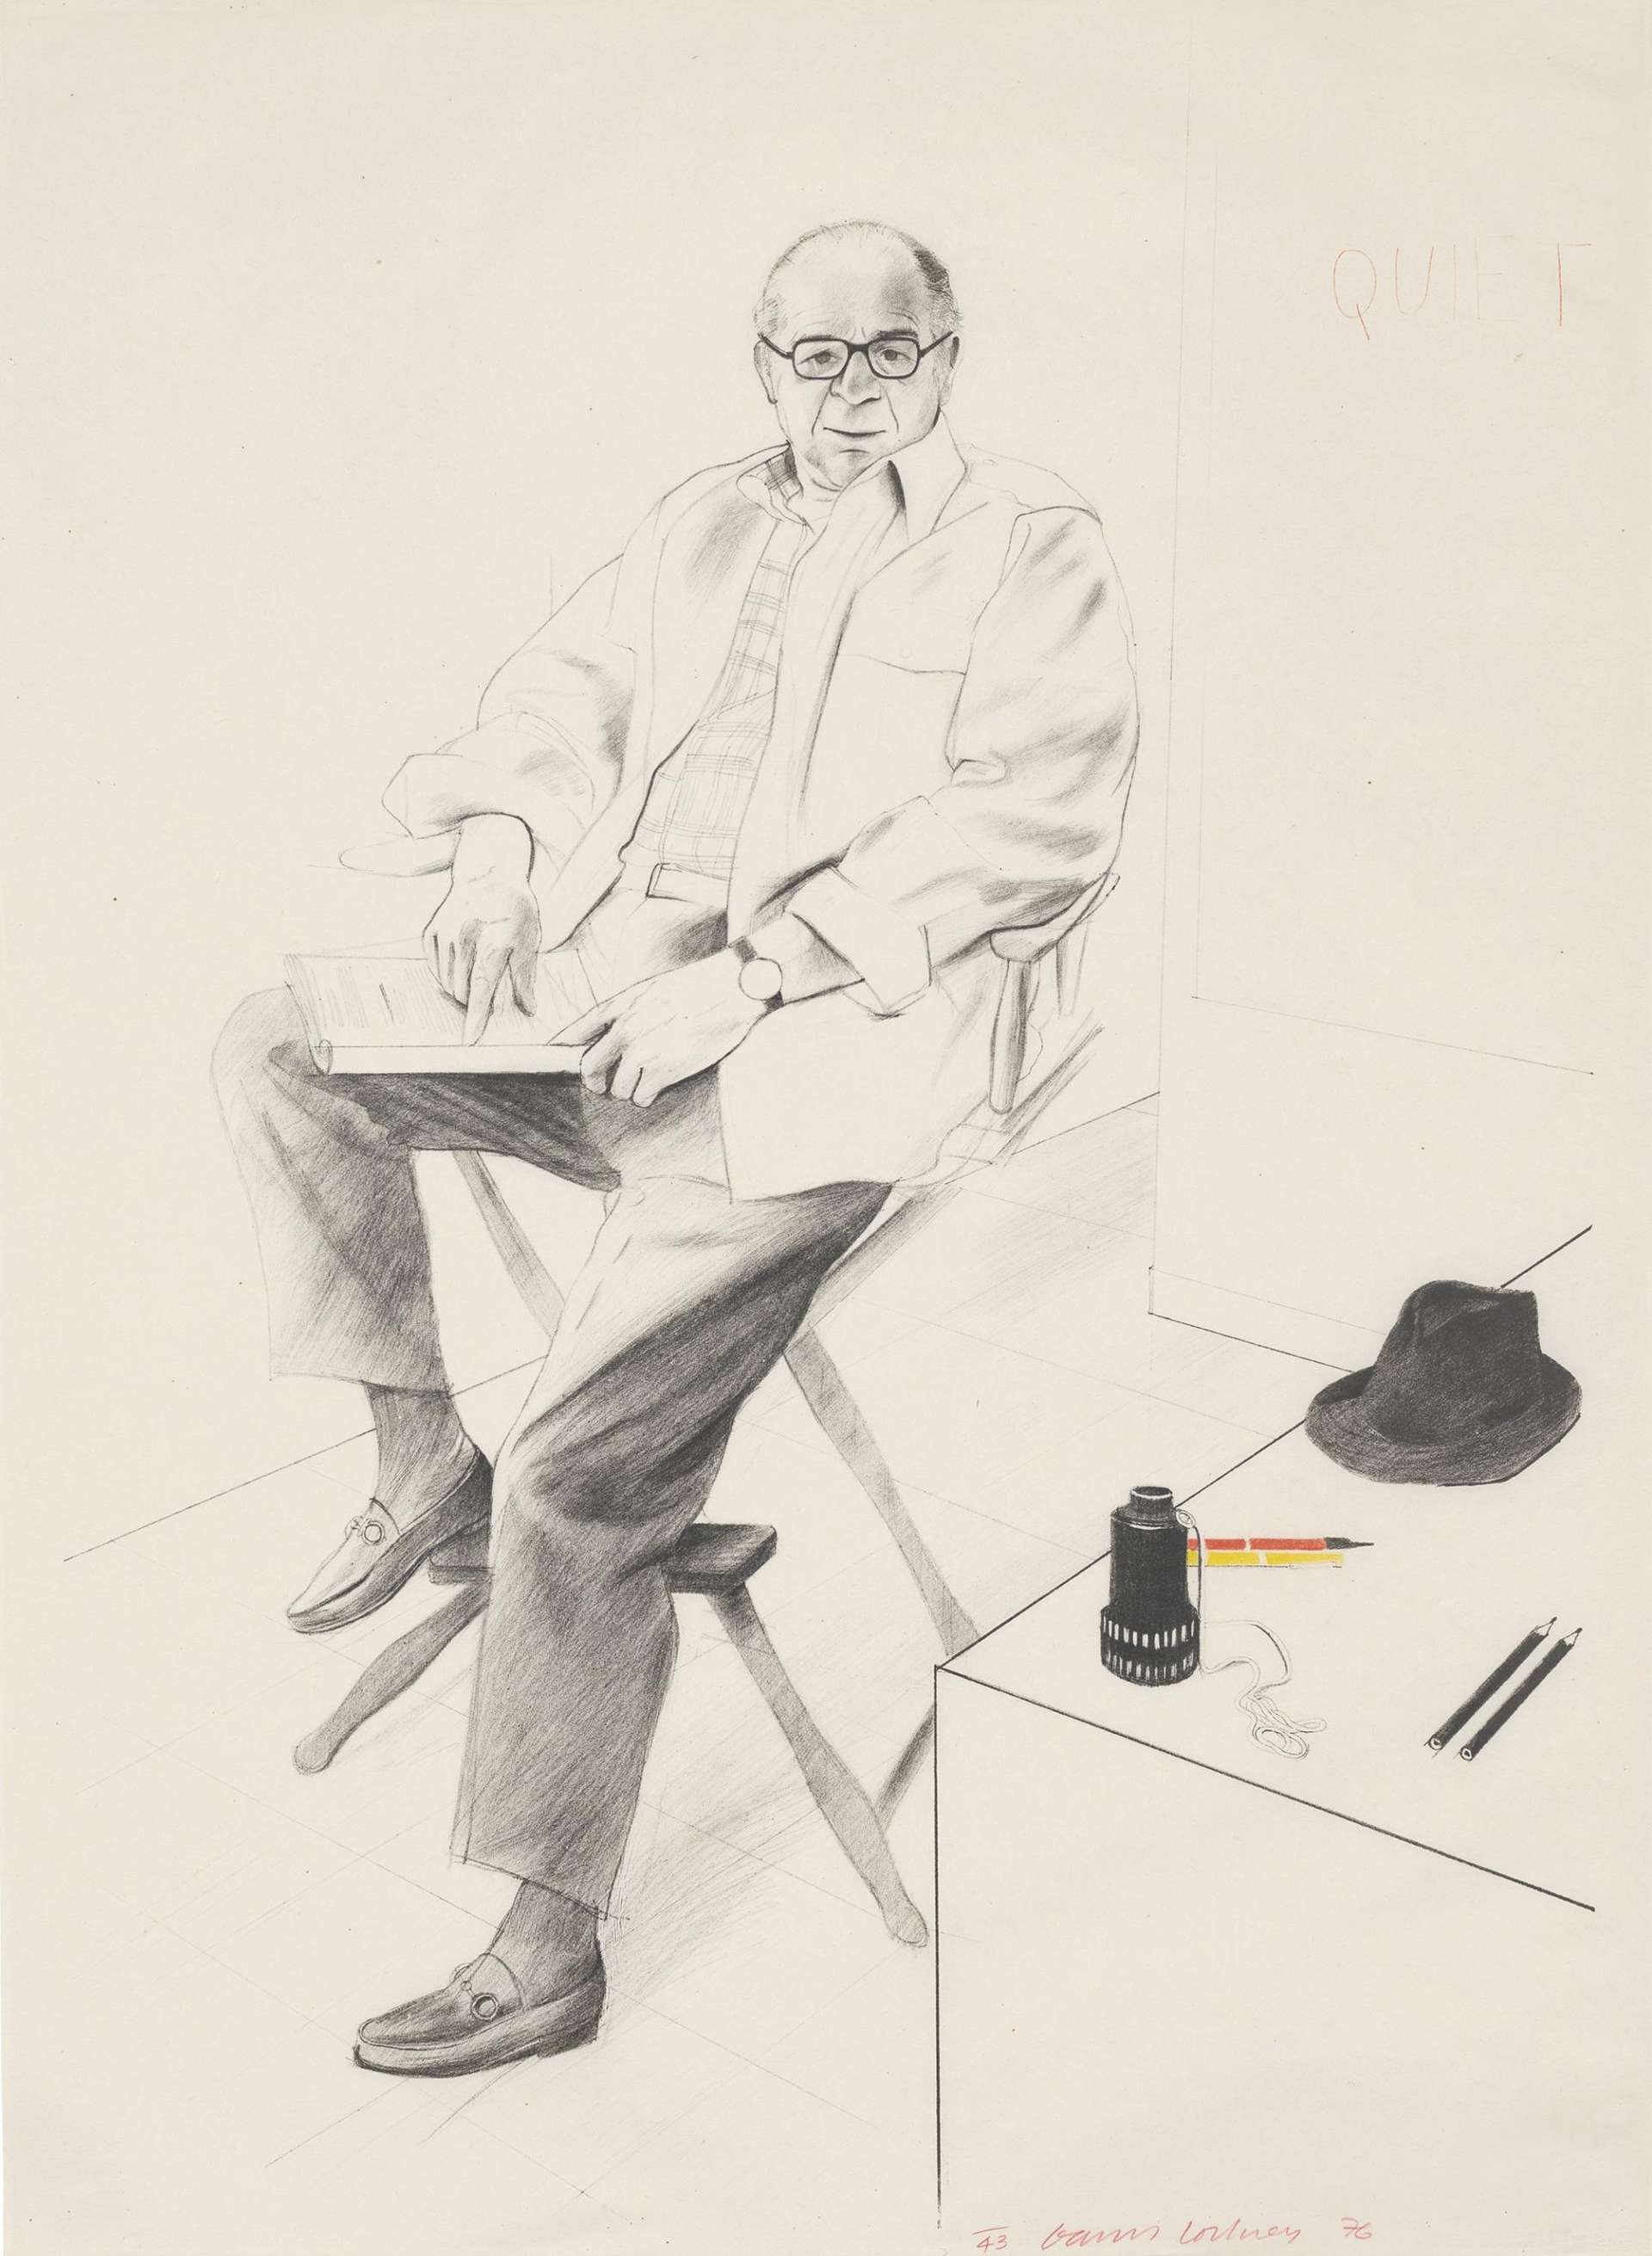 David Hockney’s Billy Wilder. A lithographic print of a drawing of Billy Wilder sitting in a chair holding a book next to a table where his hat, and other tools are placed.